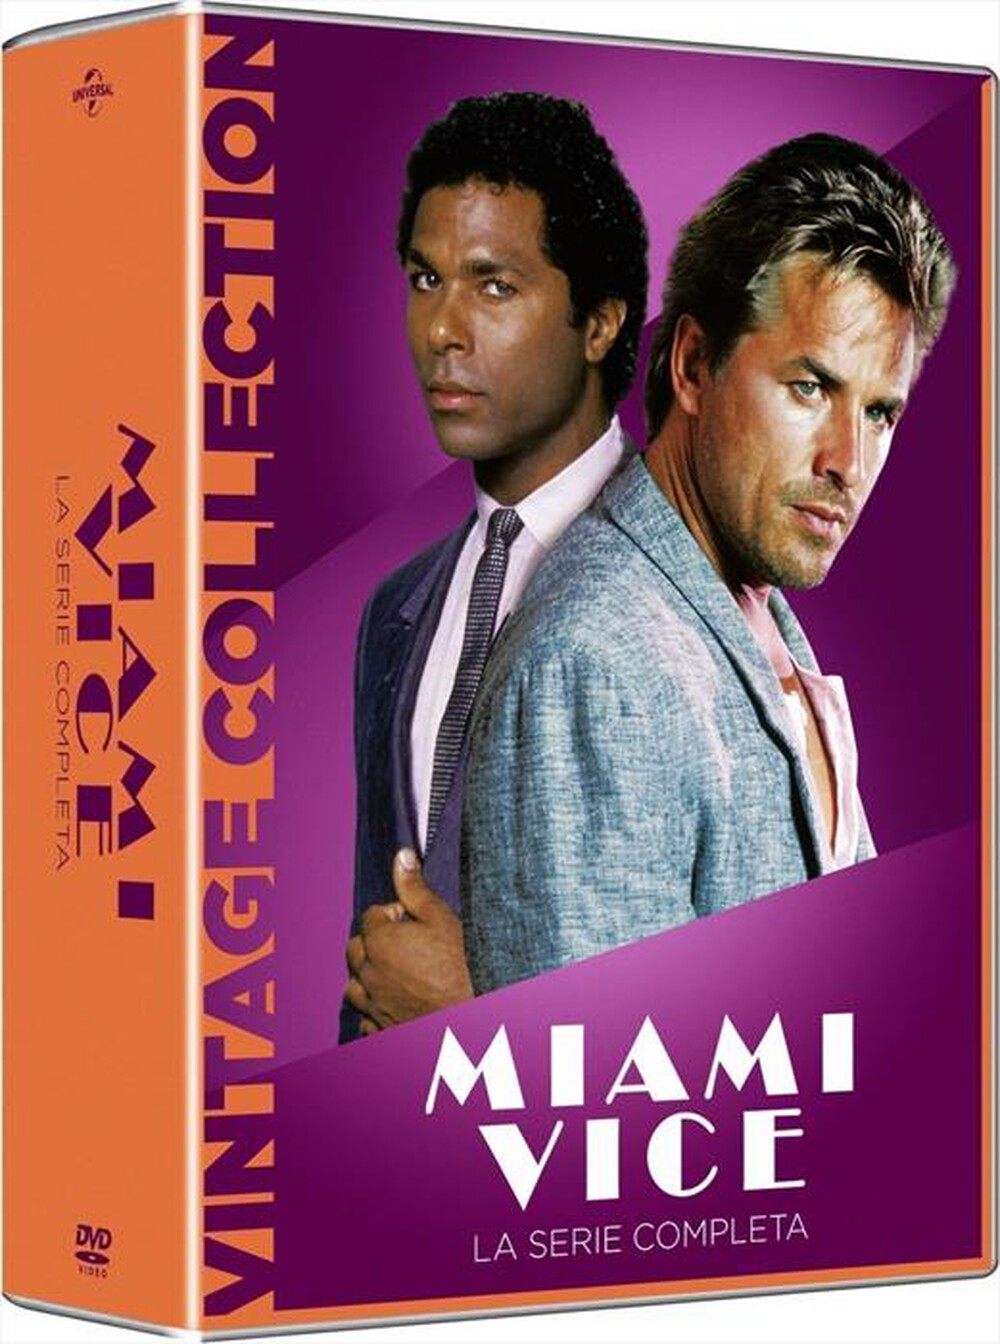 "UNIVERSAL PICTURES - Miami Vice - Stagioni 01-05 Vintage Collection ("